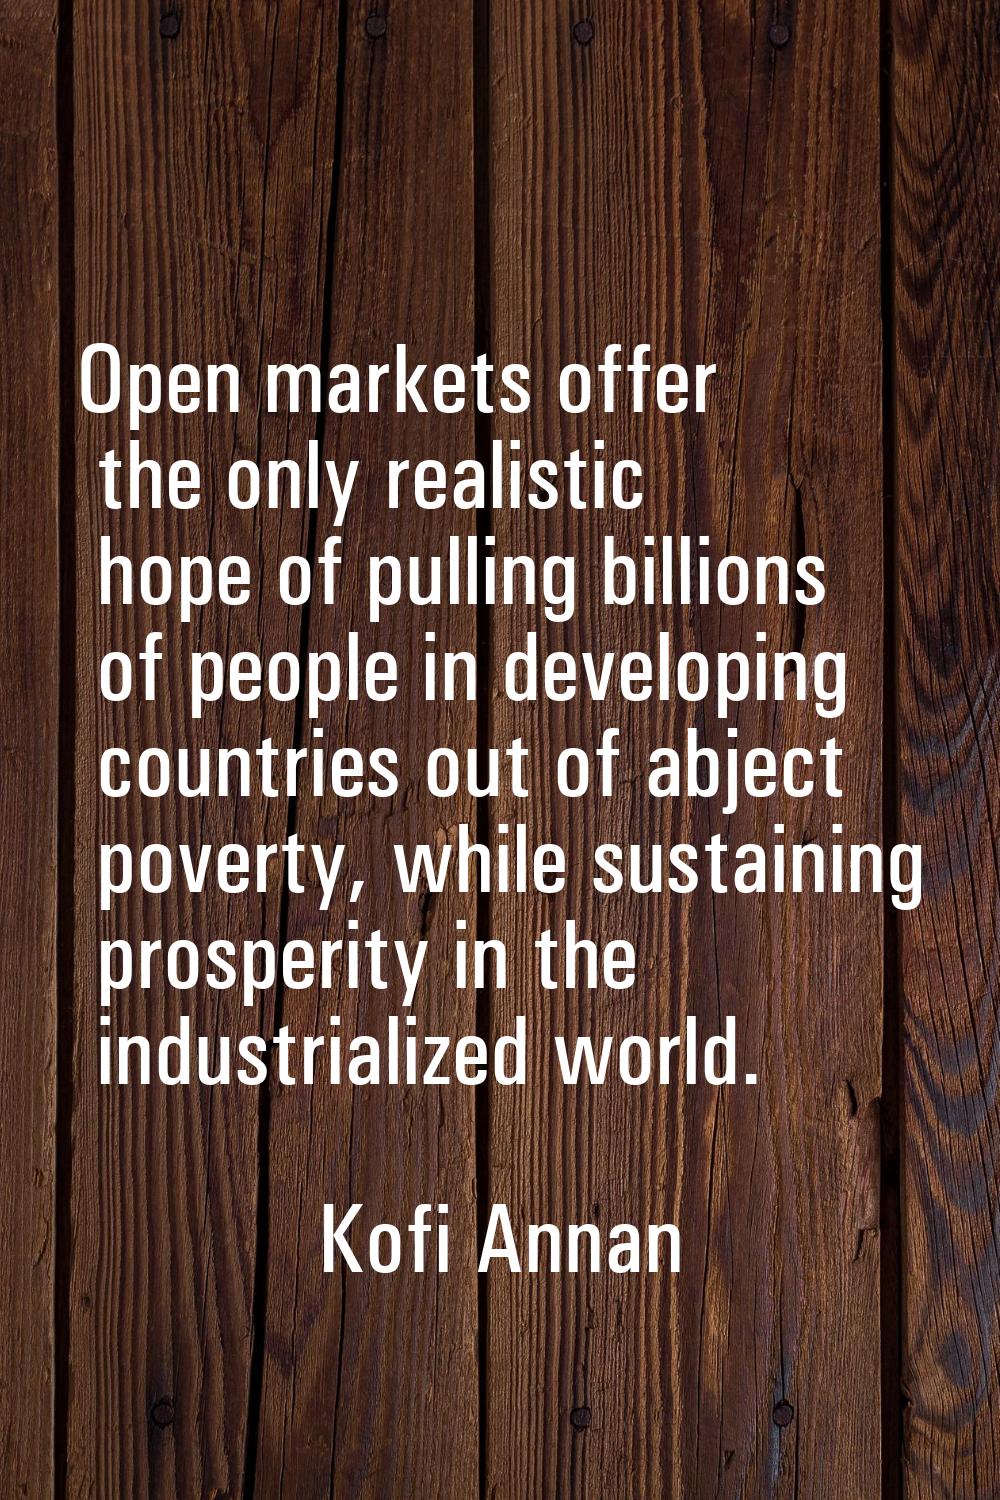 Open markets offer the only realistic hope of pulling billions of people in developing countries ou